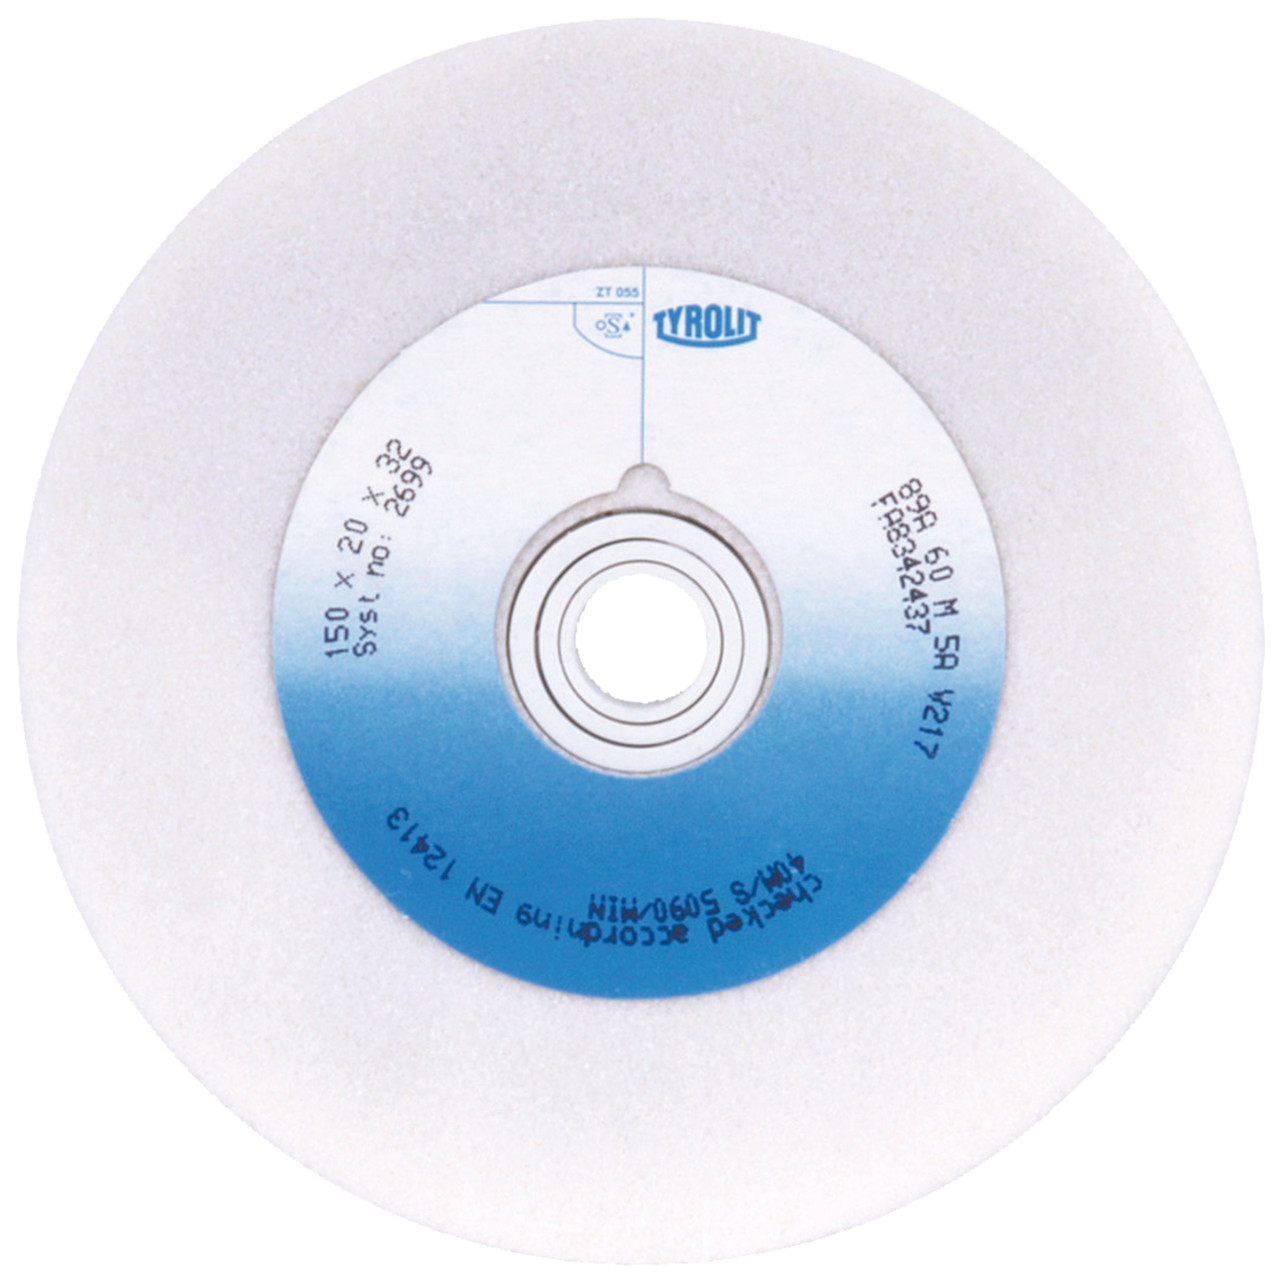 Tyrolit Conventional ceramic grinding discs DxDxH 200x32x51 For high-alloy steels and HSS, shape: 1, Art. 78379